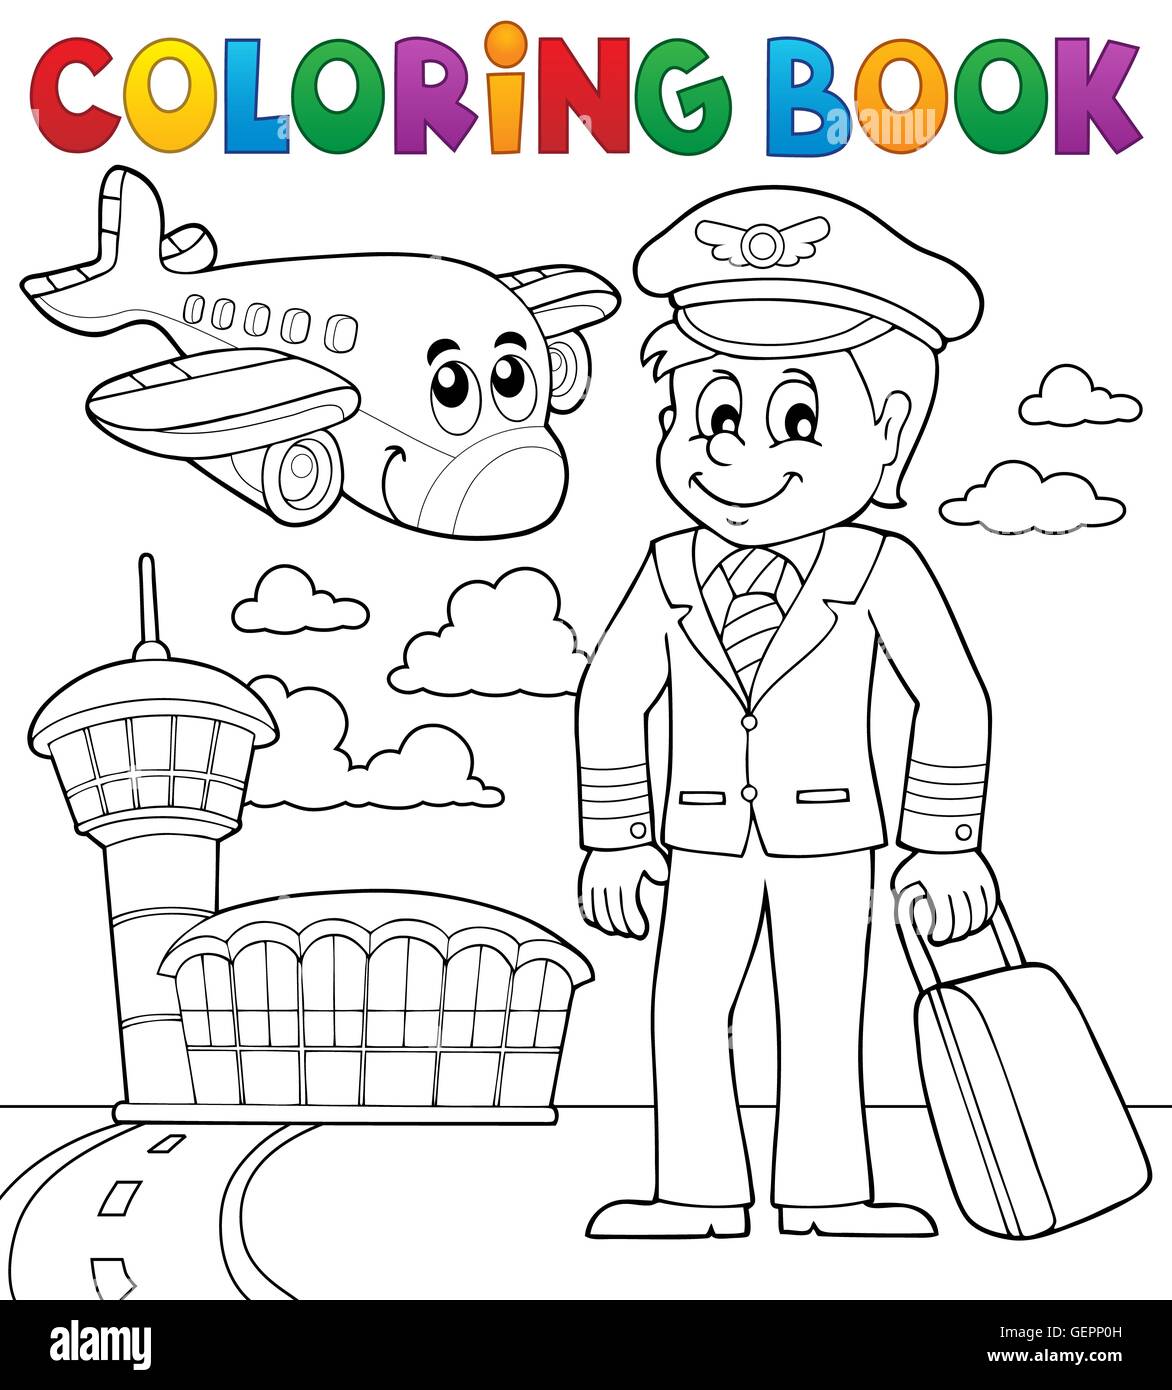 Coloring book aviation theme 1 - picture illustration. Stock Photo